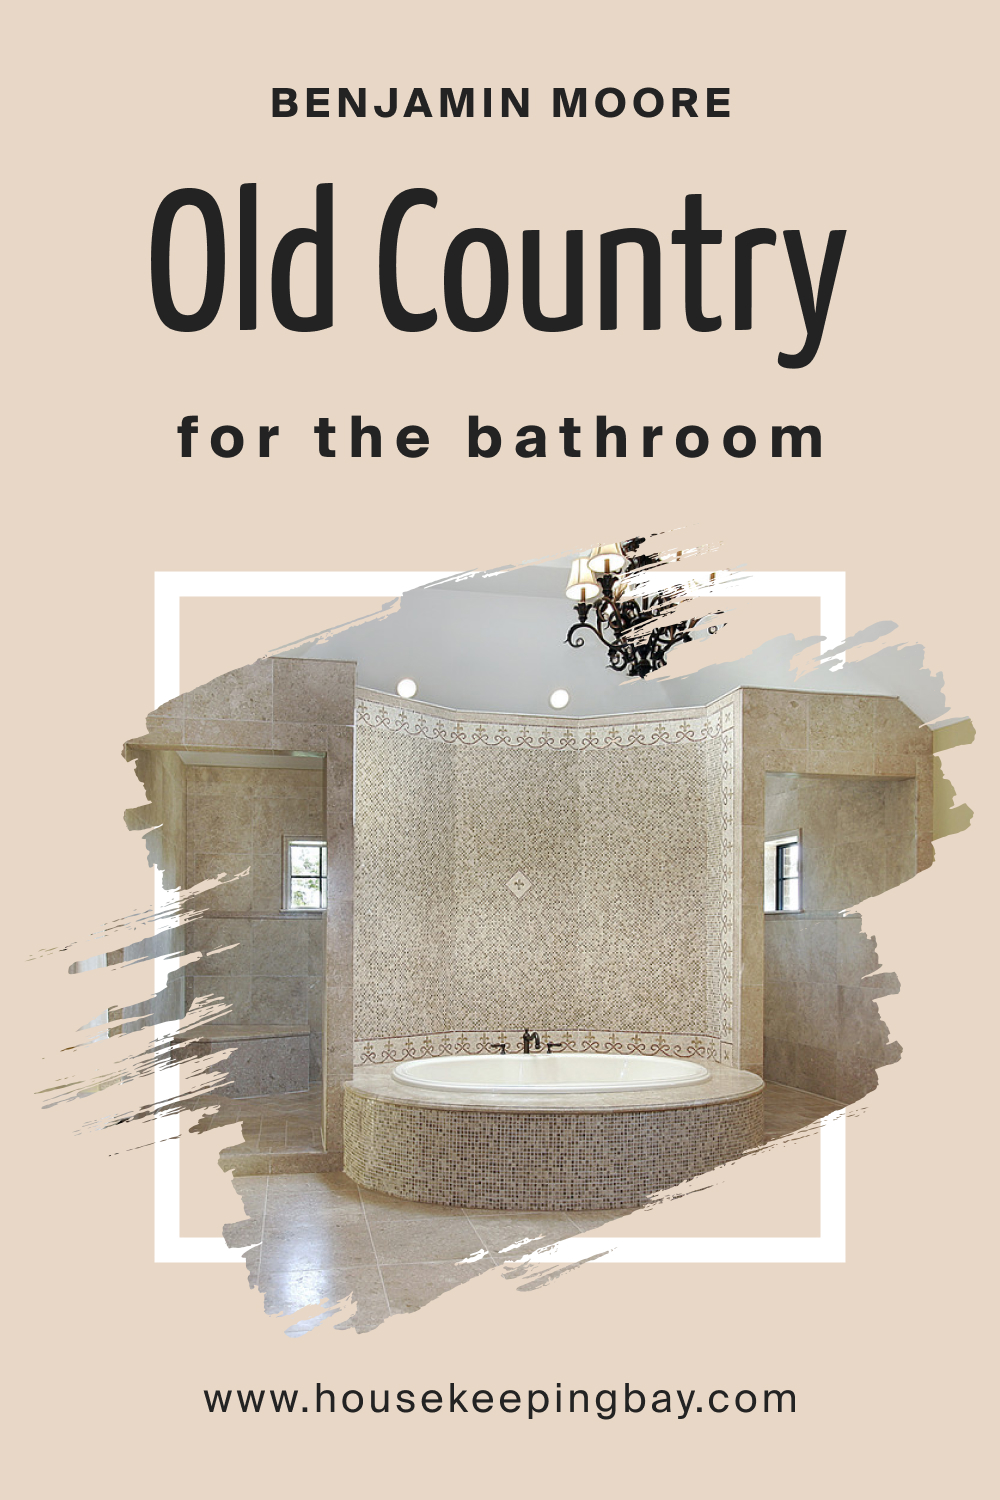 Benjamin Moore. Old Country OC 76 for the Bathroom